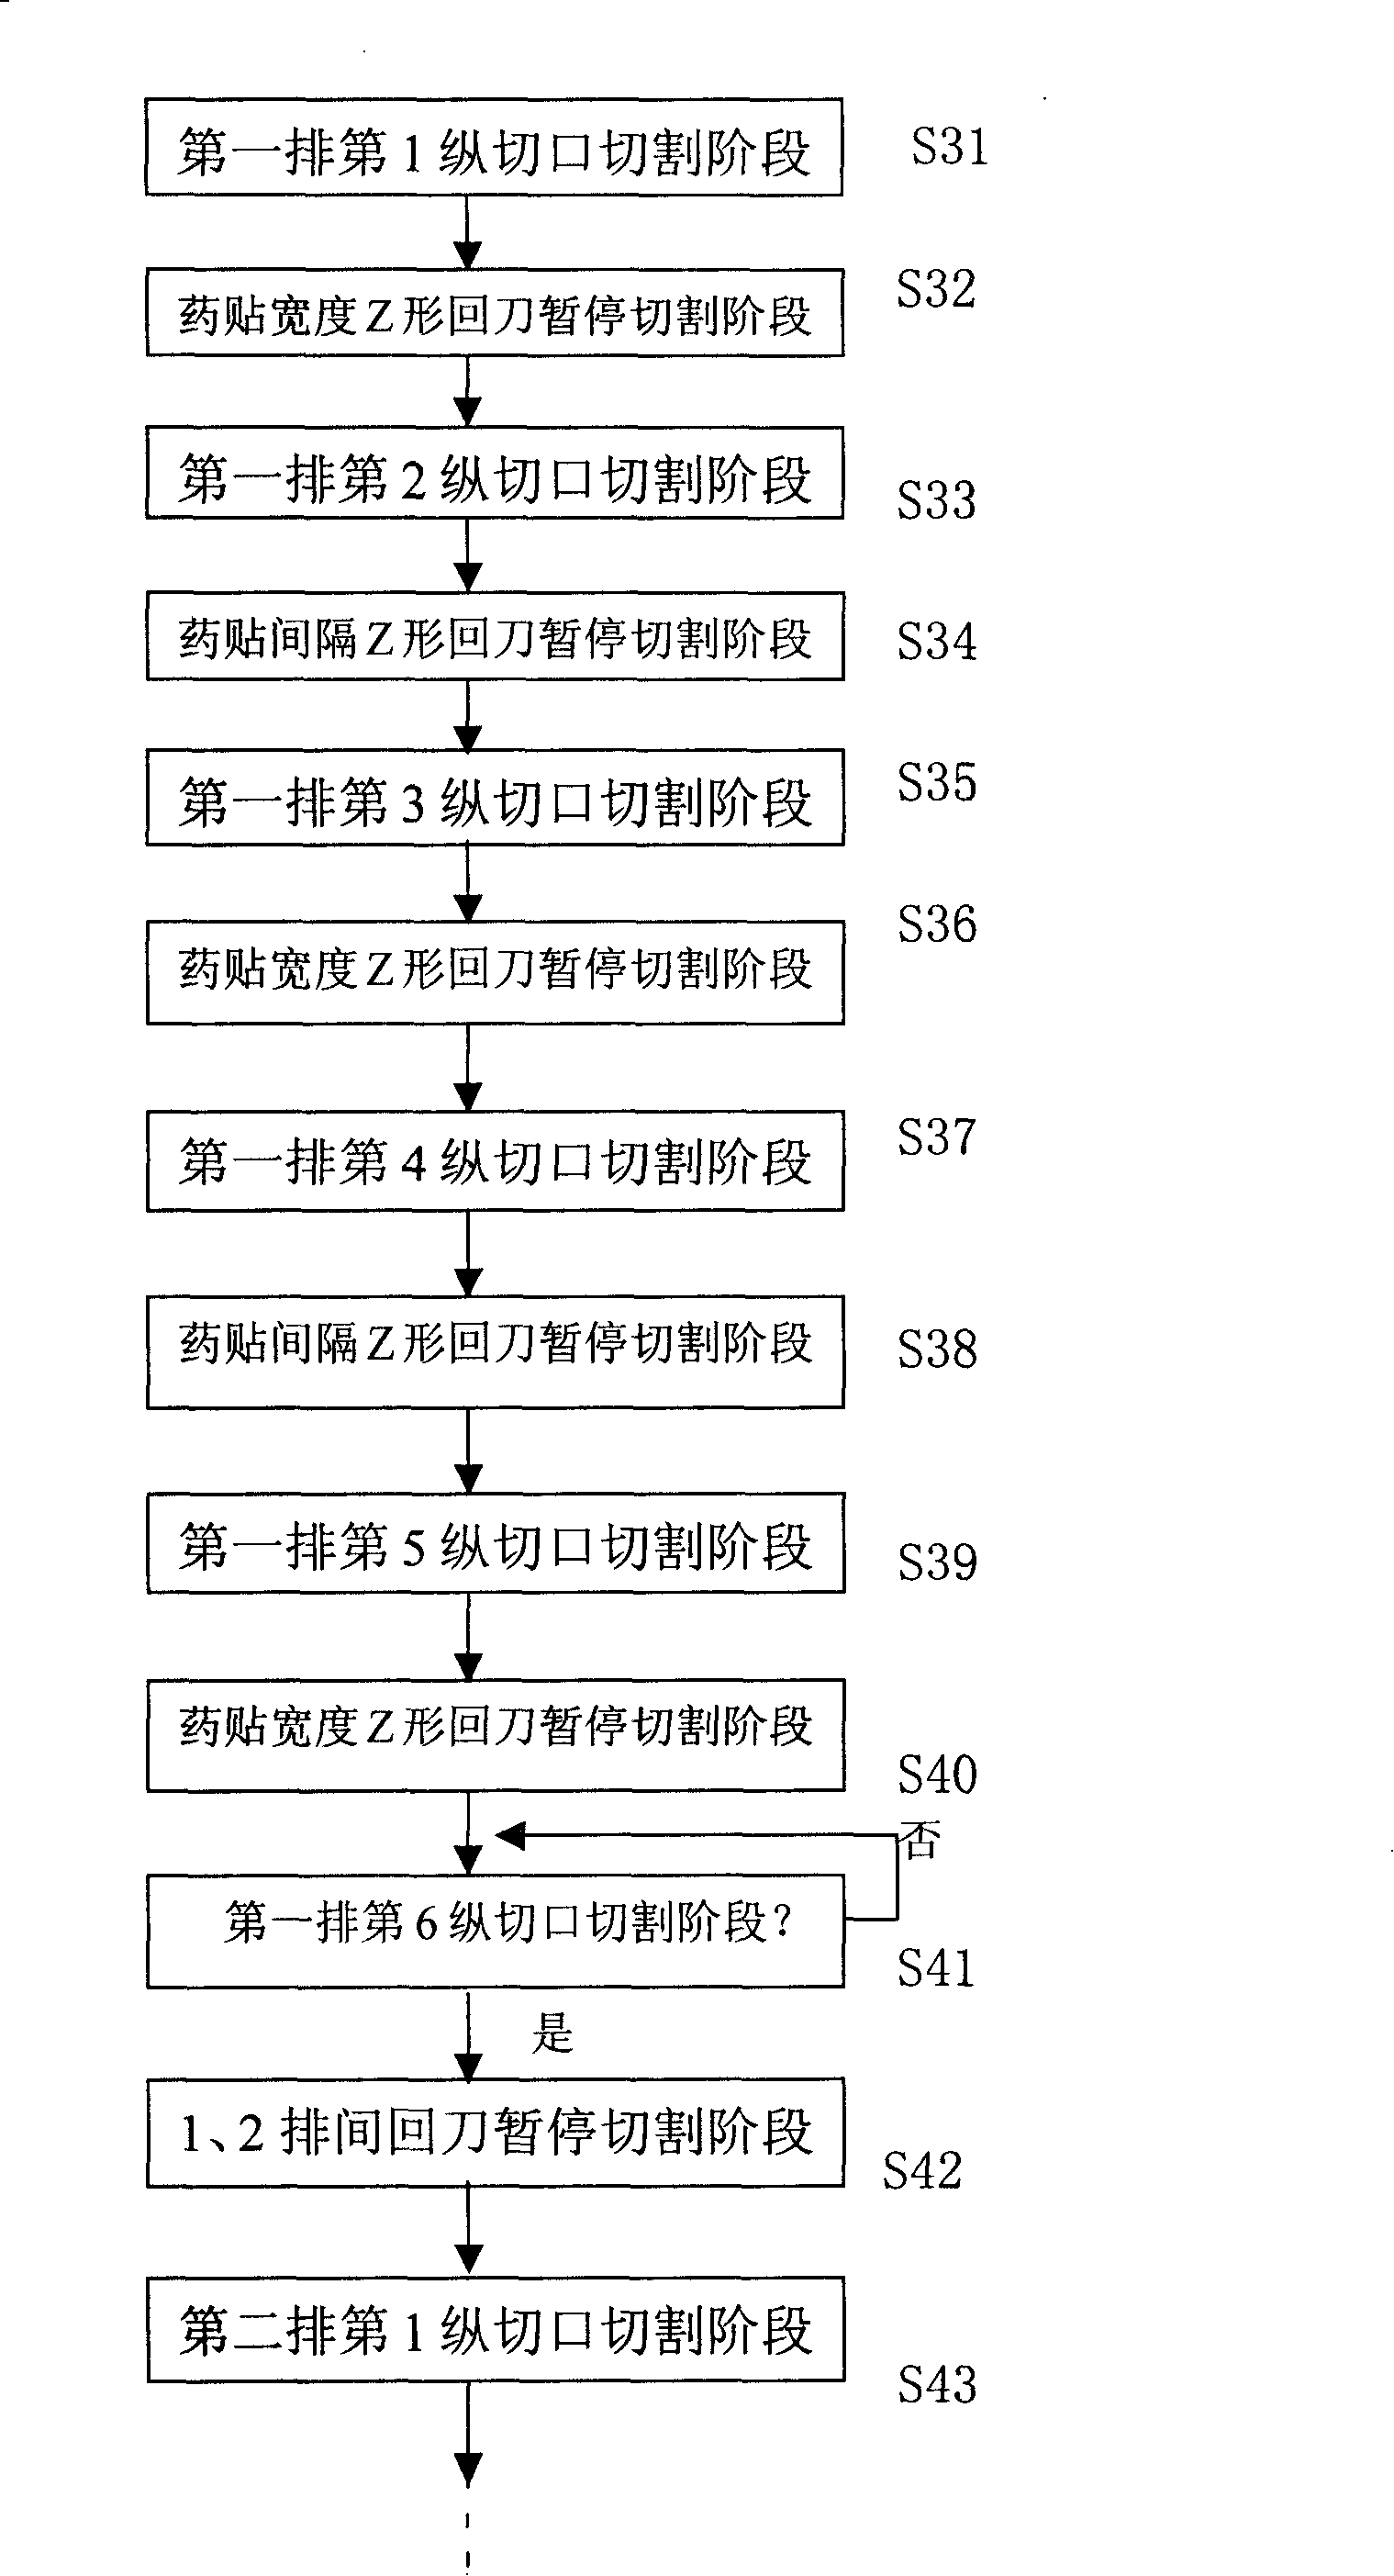 Method of external application medicine patch  on-line die cutting